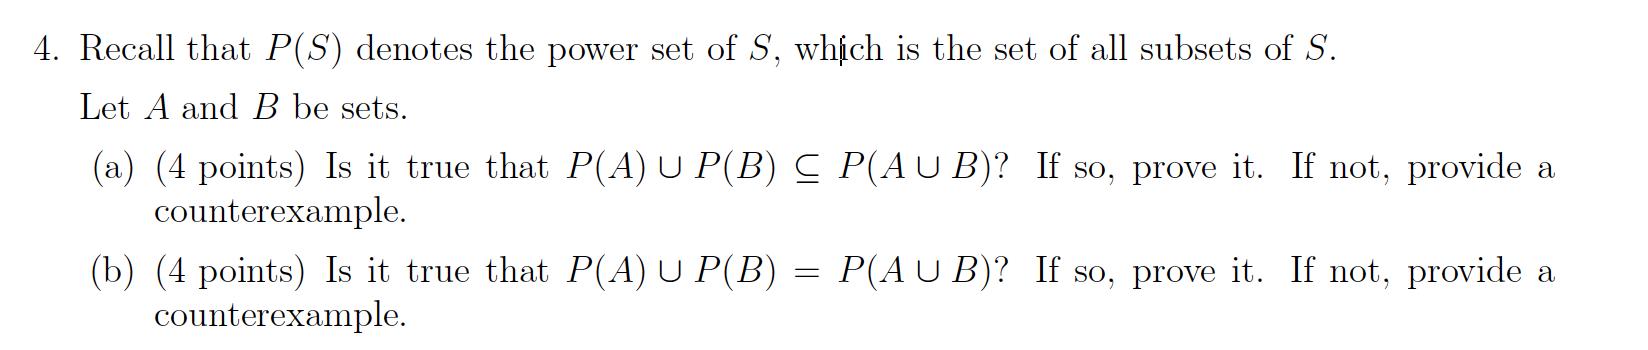 4. Recall that P(S) denotes the power set of S, which is the set of all subsets of S. Let A and B be sets.